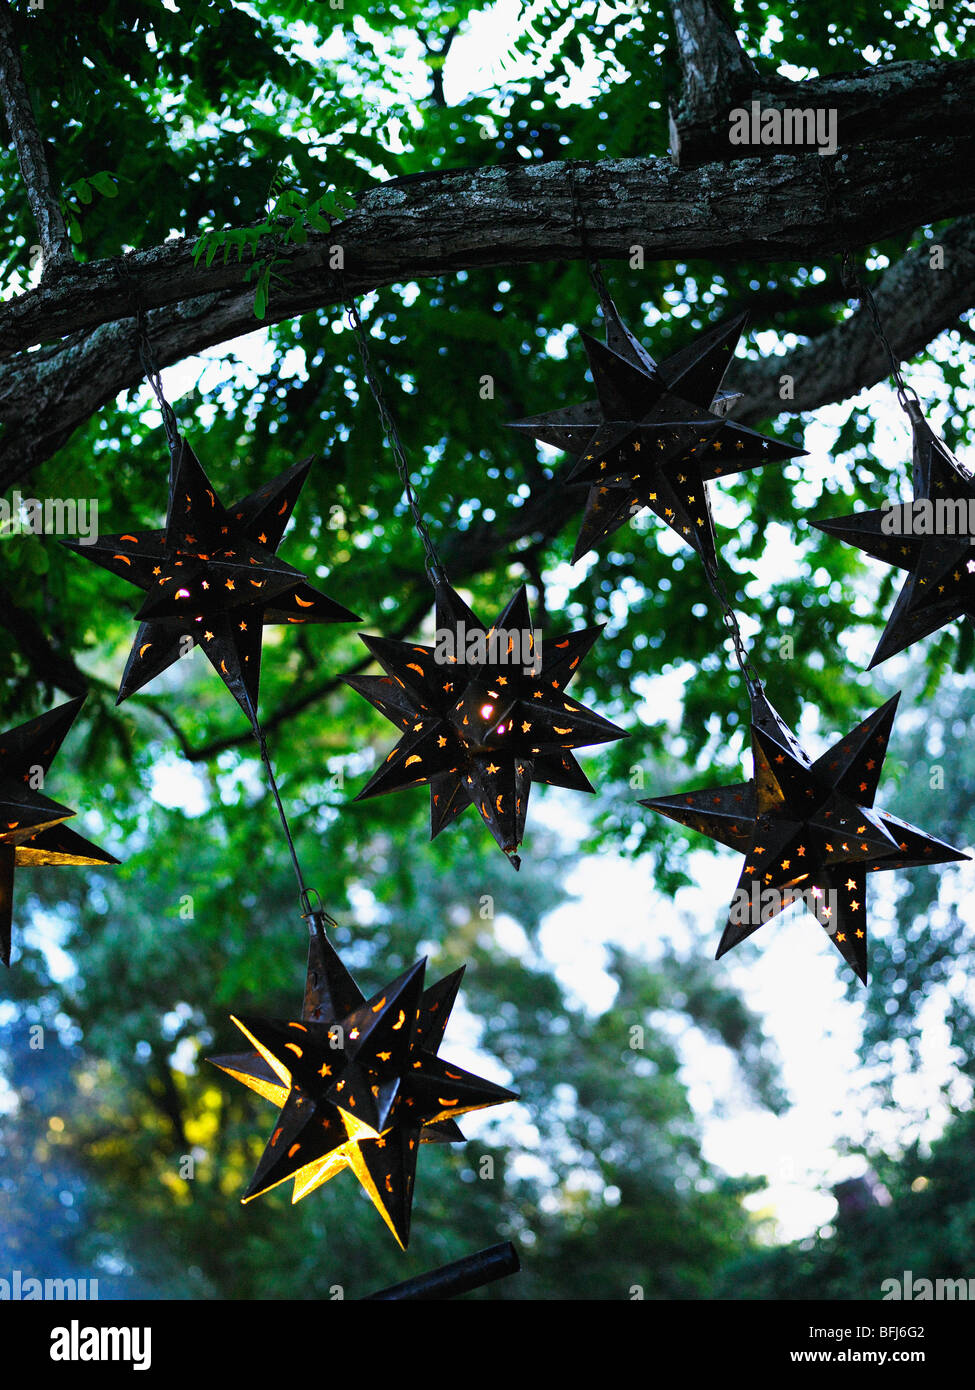 Star-shaped lanterns hanging in a tree, South Africa. Stock Photo